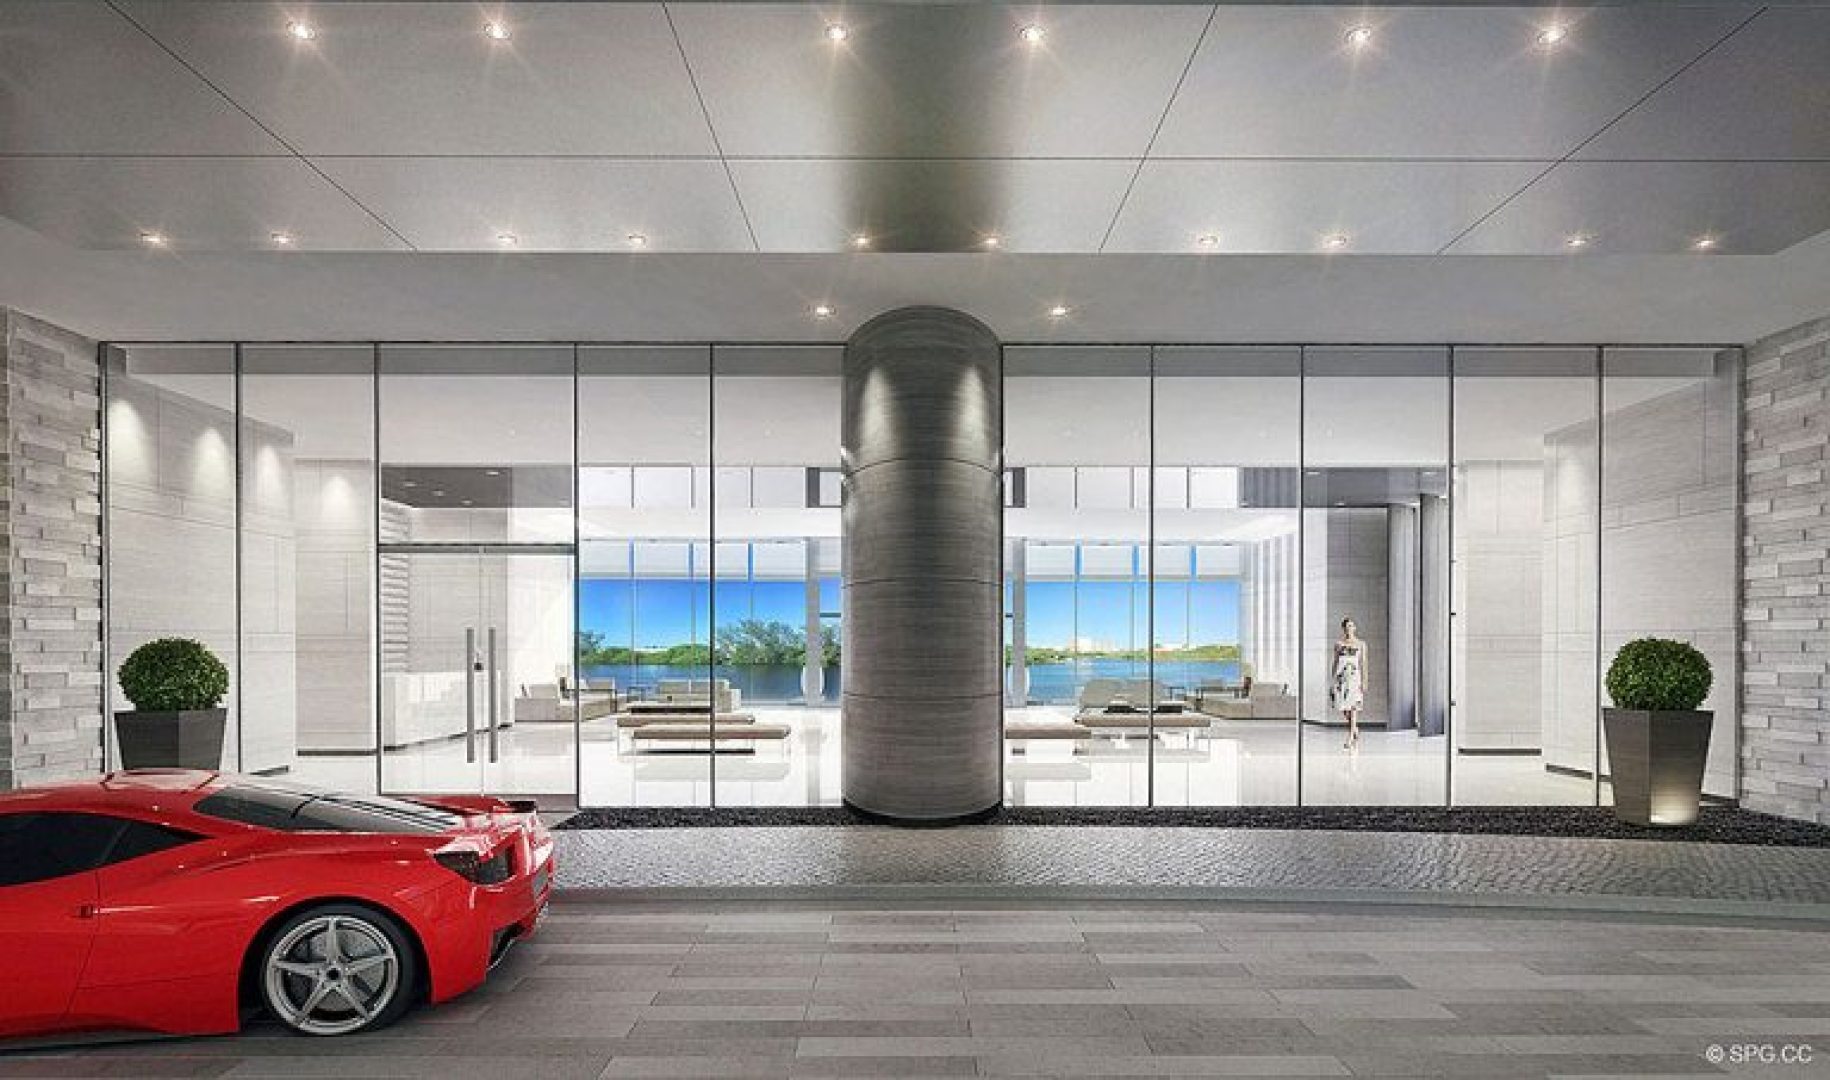 Vehicle Drop-off to Lobby at Riva, Luxury Waterfront Condos in Fort Lauderdale, Florida 33304.